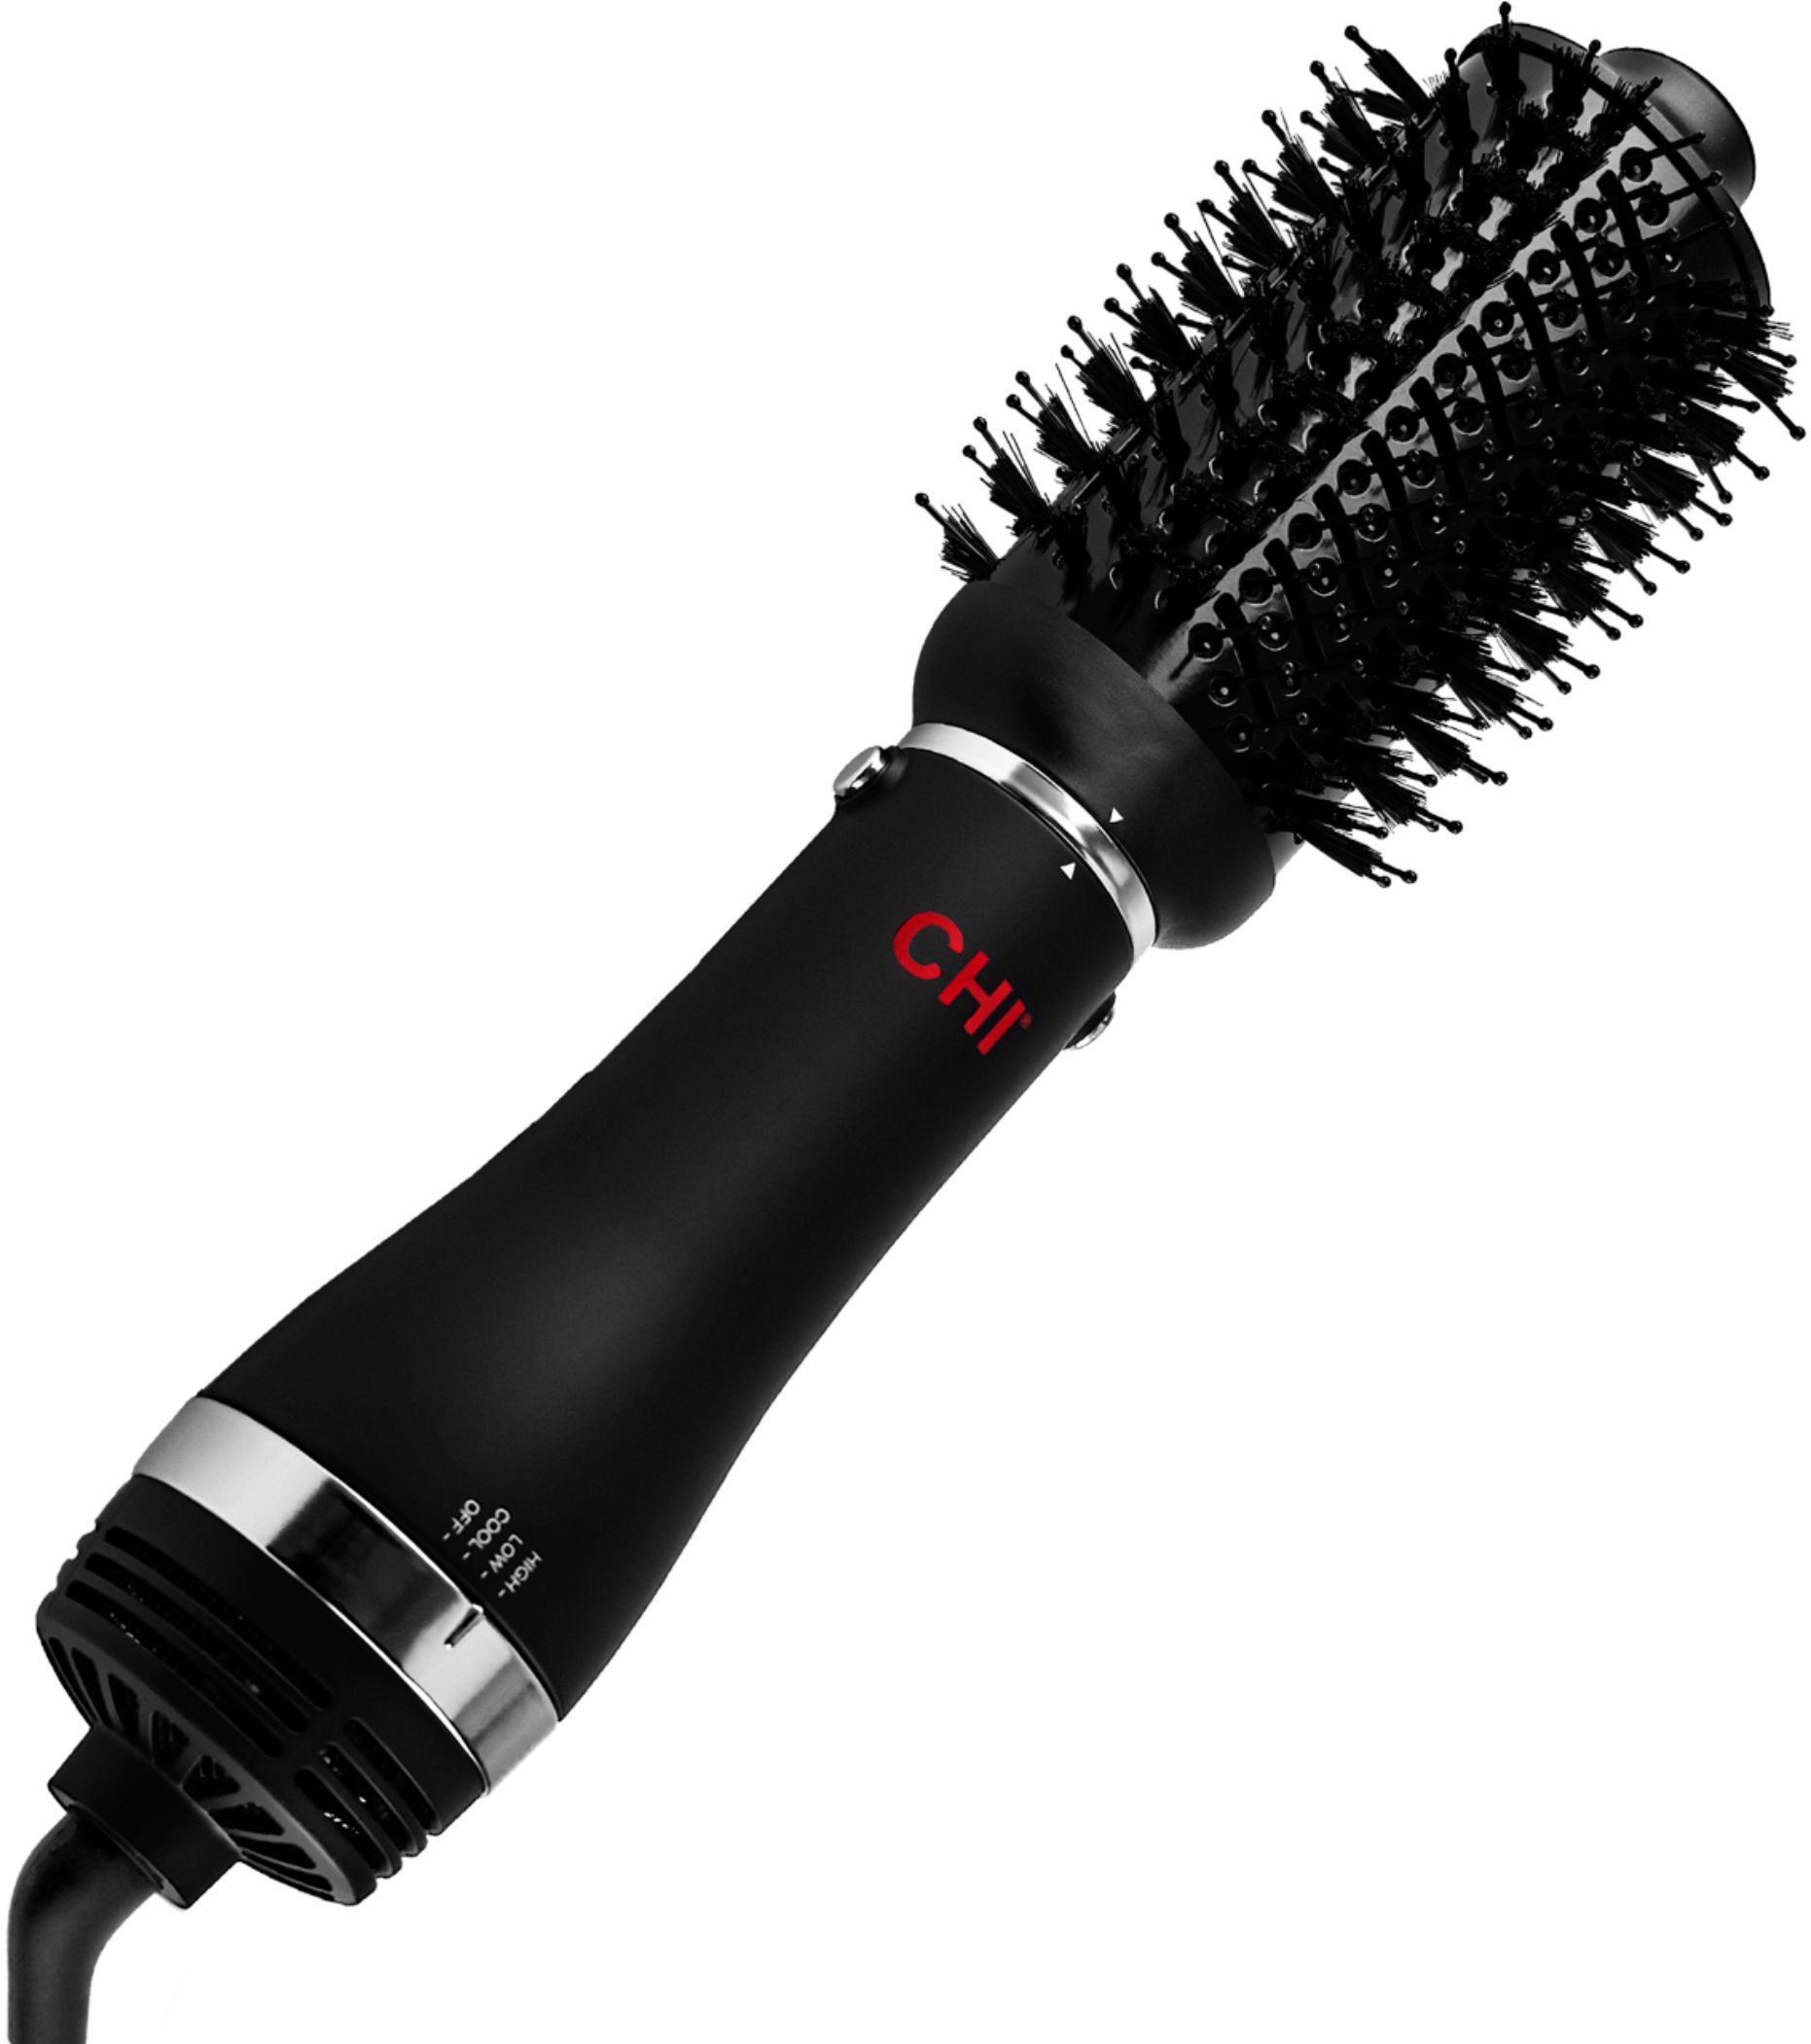 I bought the viral Revlon hot air brush from  Canada: Here's my review